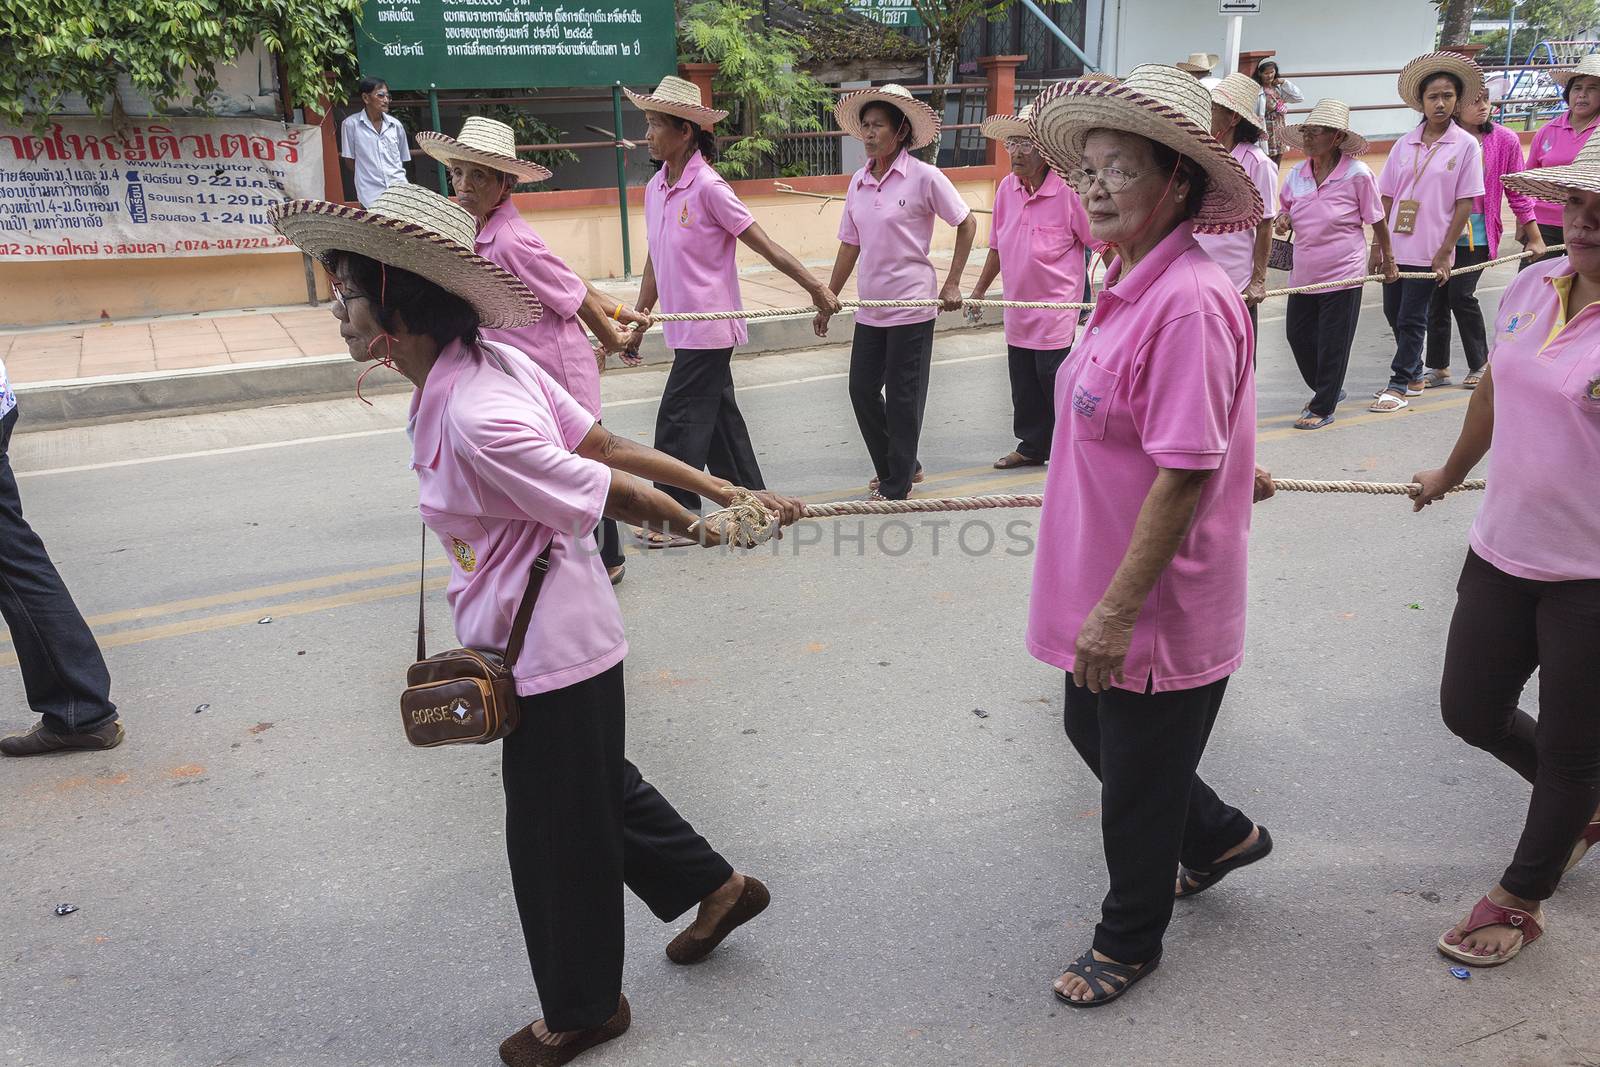 THAILAND - OCTOBER 20: Unidentified people participated in "Ngan Chak Pra", a traditional buddhist festival on October 20, 2013 in Chaiya,Suratthani, Thailand.